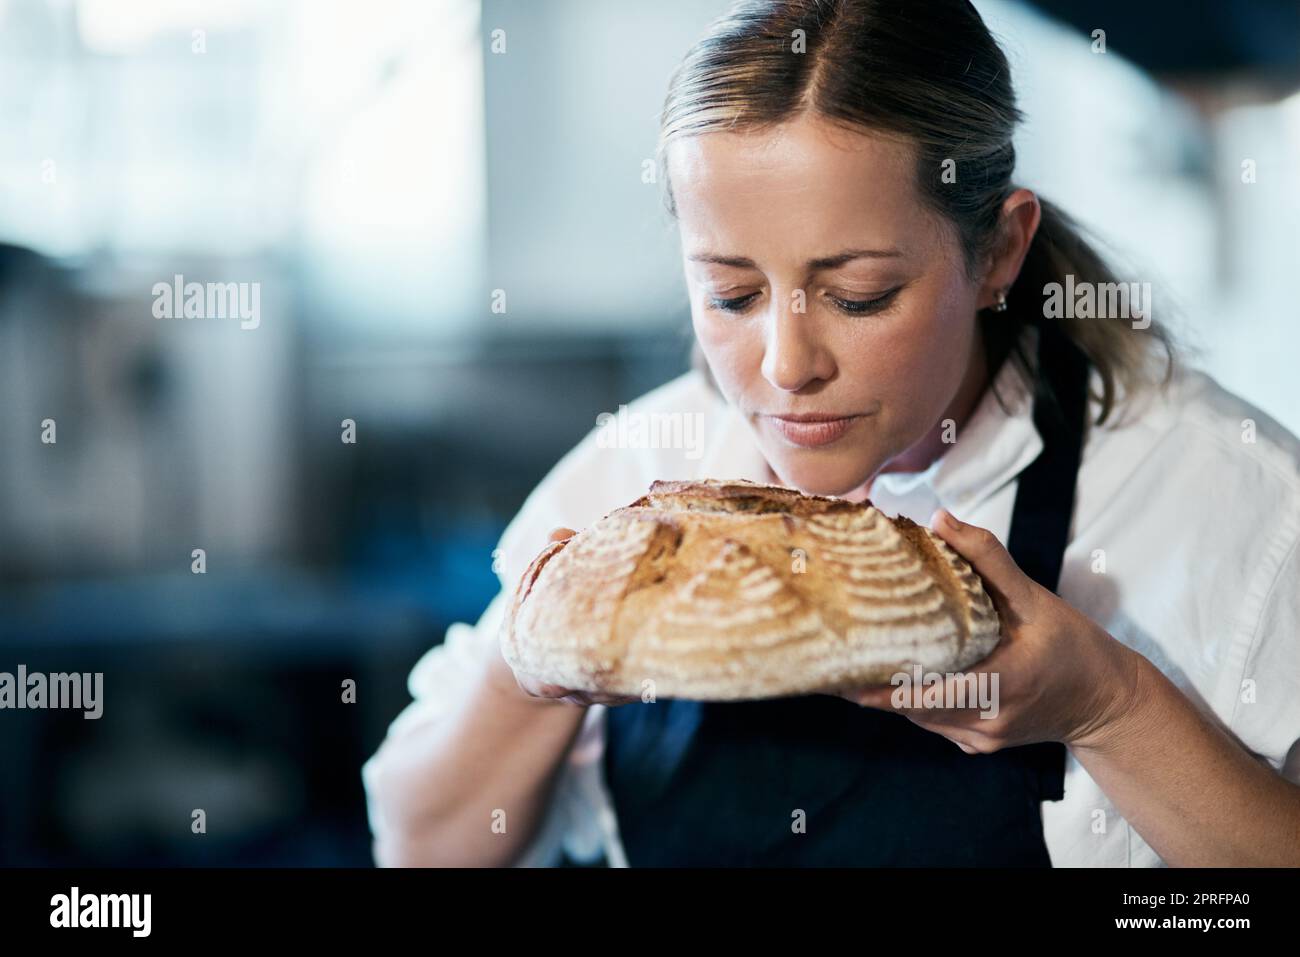 Baker, pastry chef and cafe owner smelling a loaf of fresh baked bread in the kitchen of her coffee shop. Closeup of a female cook enjoying the aroma of a freshly made dough treat or consumables Stock Photo